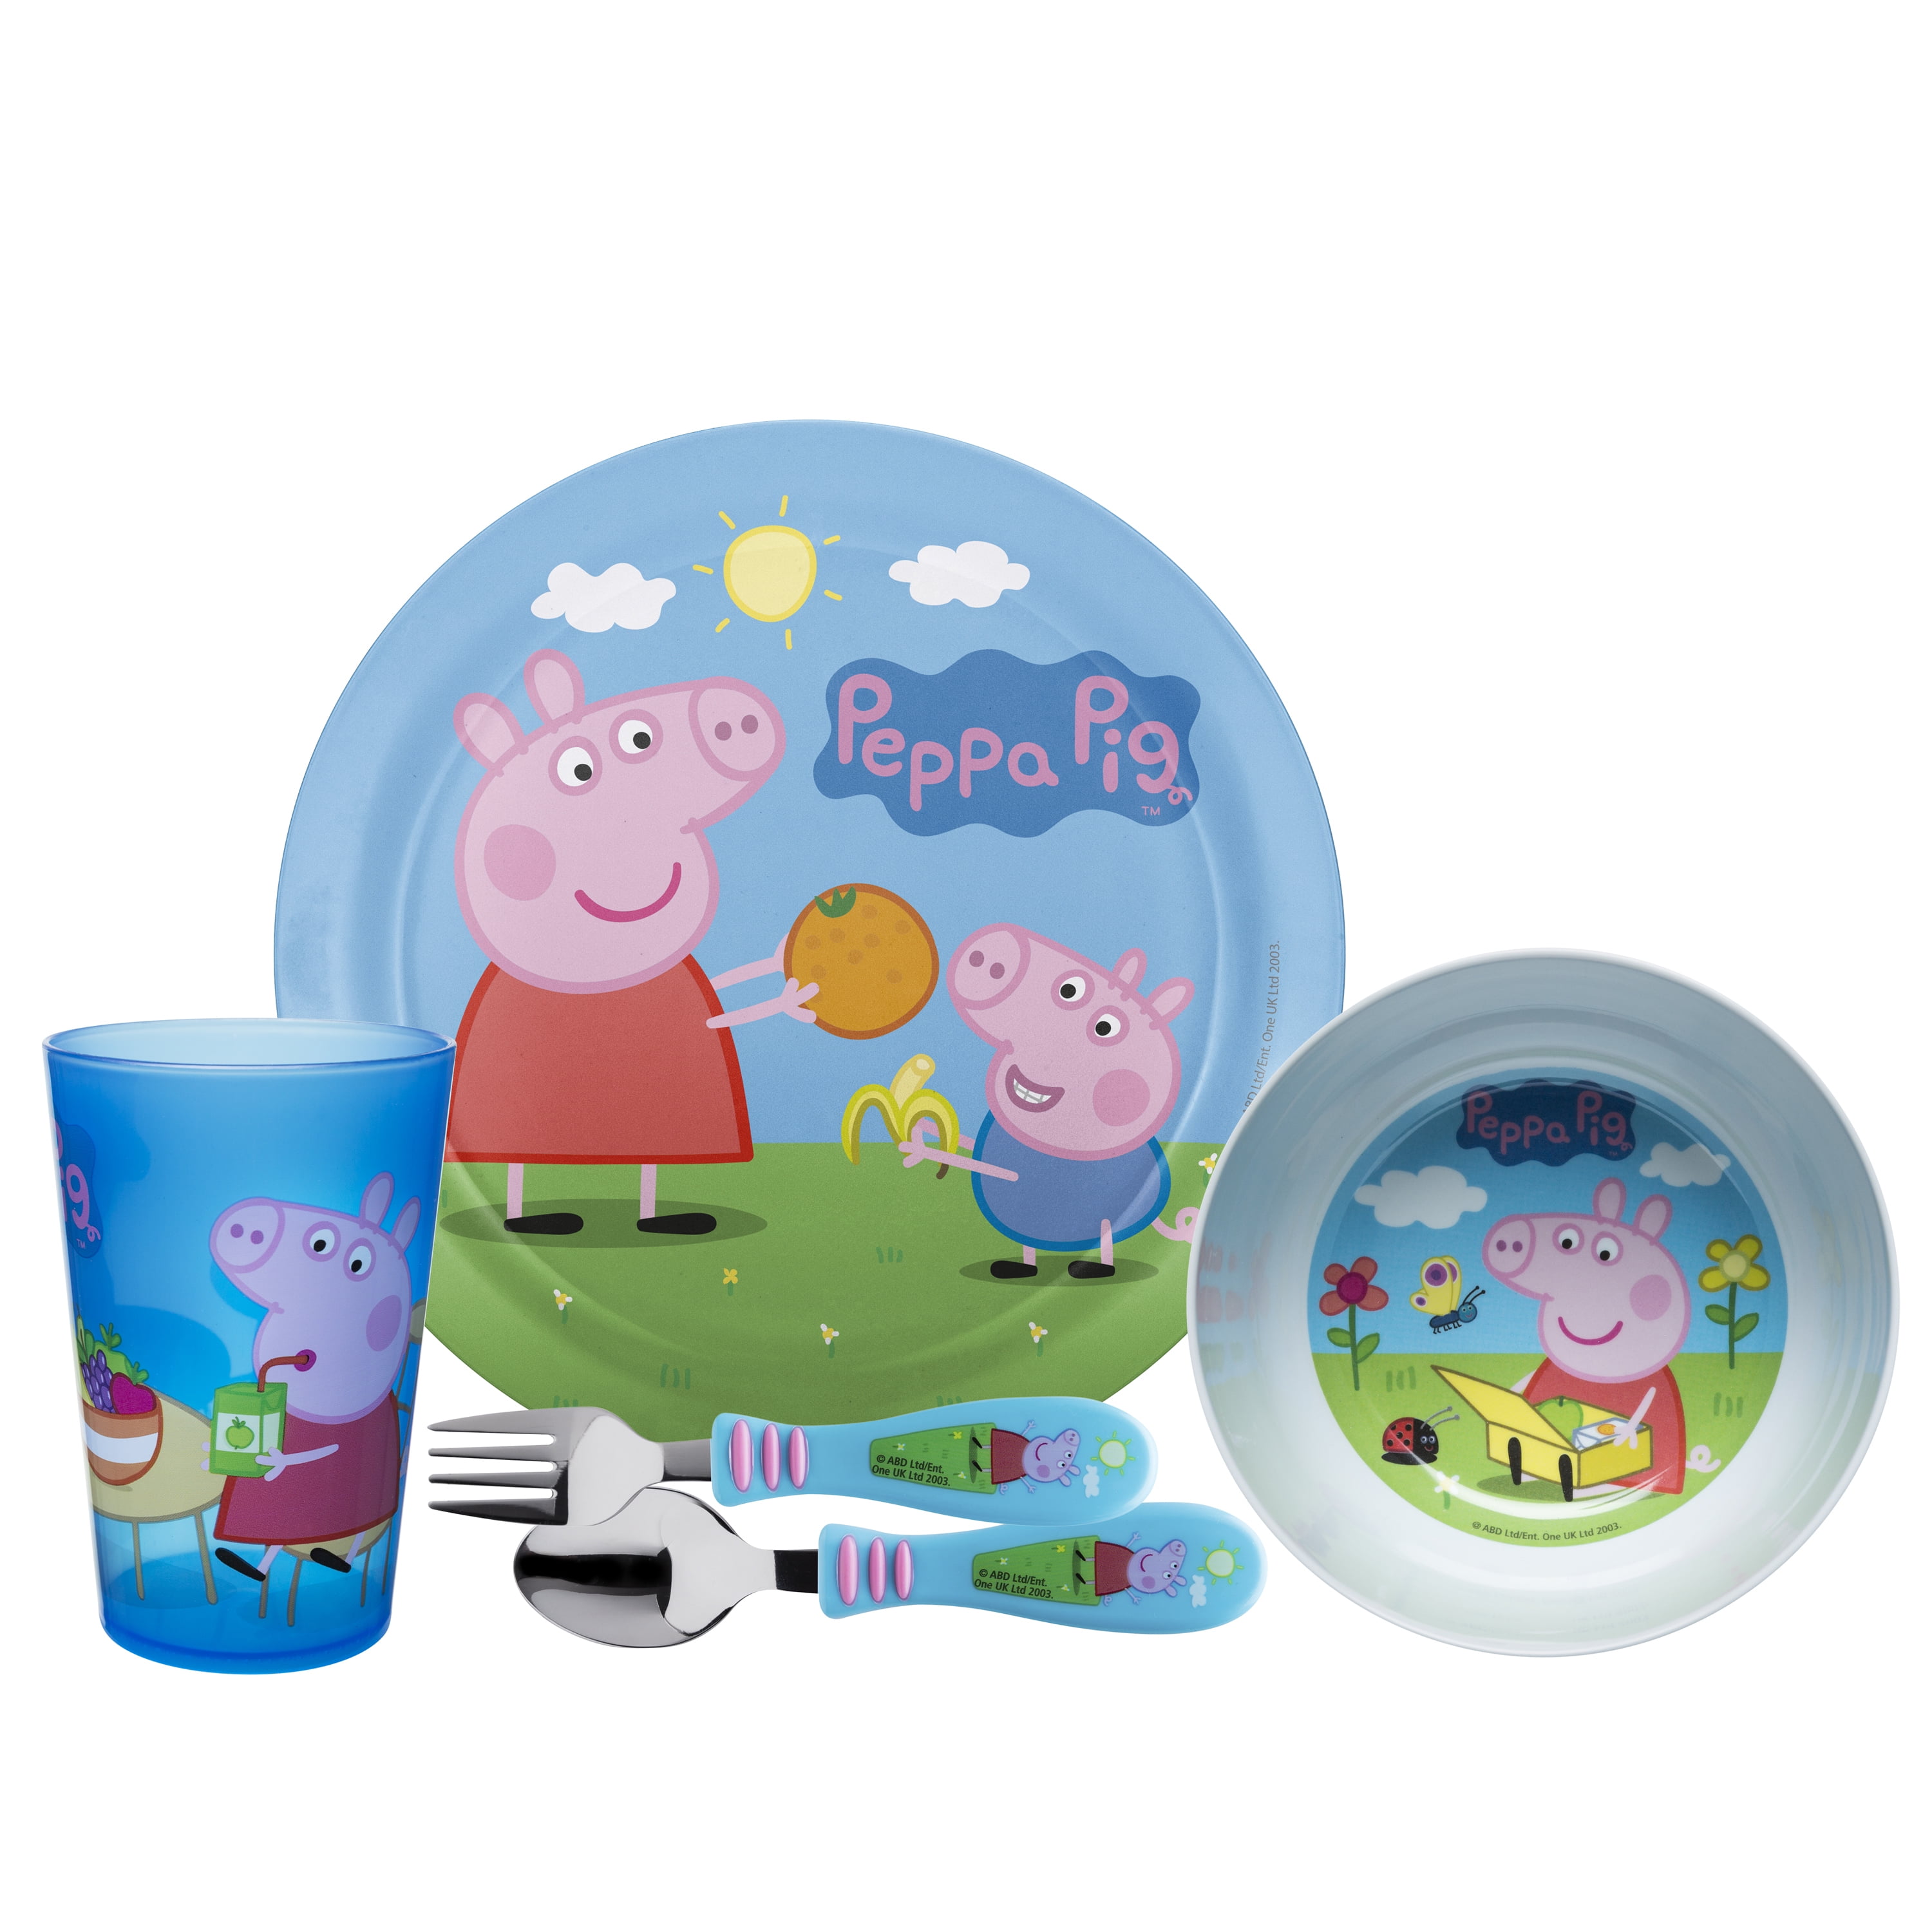 RECTANGULAR LUNCH BOX WITH CUTLERY PEPPA PIG – Kids Licensing